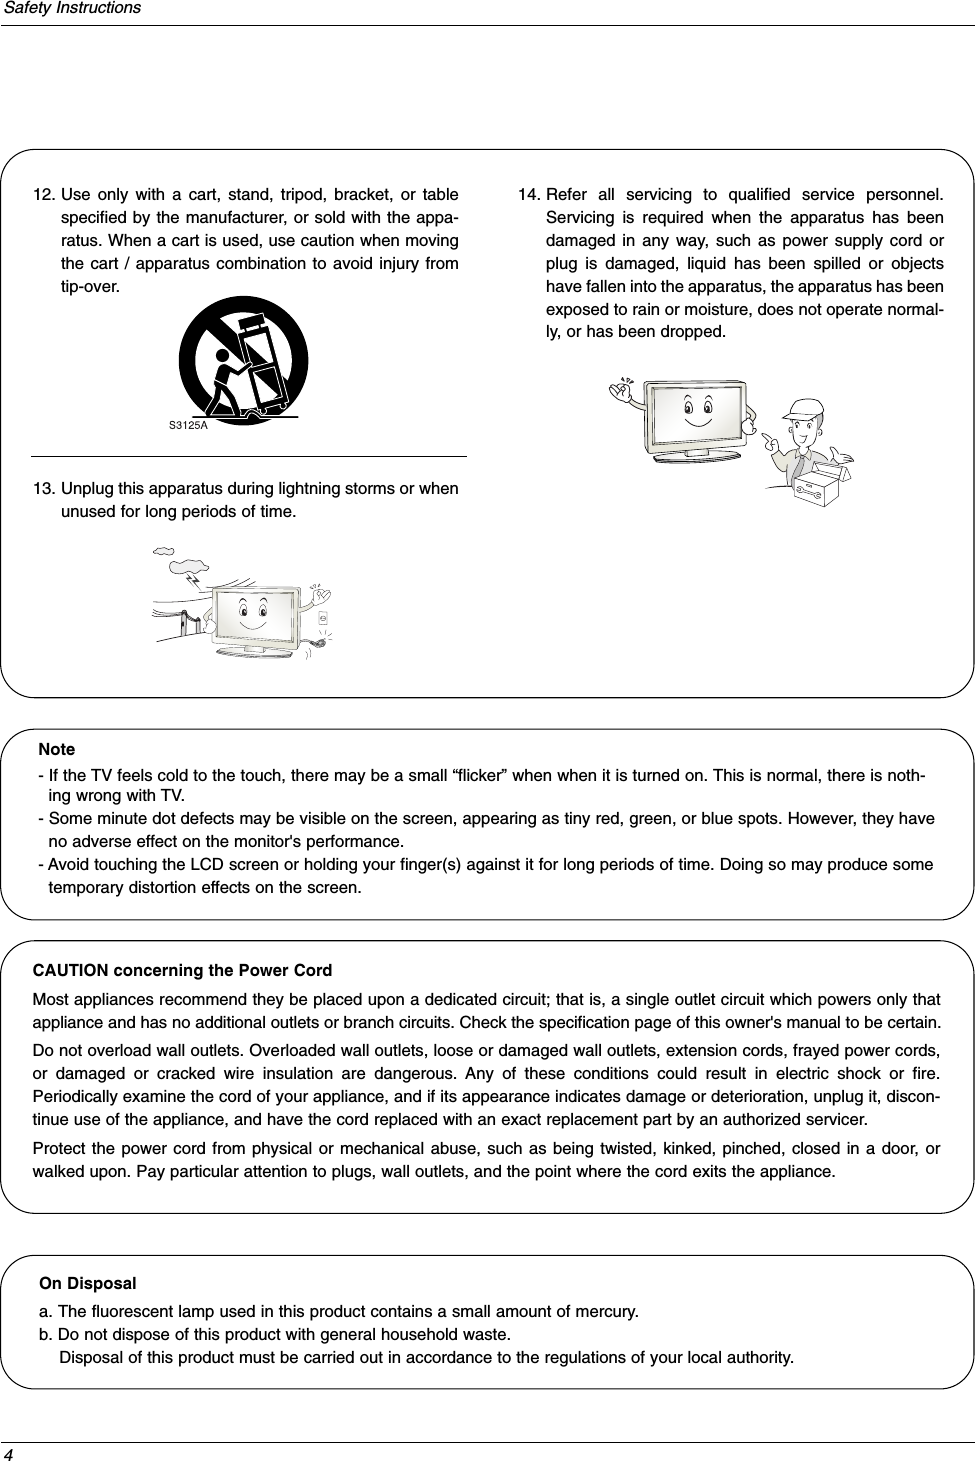 4Safety Instructions12. Use only with a cart, stand, tripod, bracket, or tablespecified by the manufacturer, or sold with the appa-ratus. When a cart is used, use caution when movingthe cart / apparatus combination to avoid injury fromtip-over.13. Unplug this apparatus during lightning storms or whenunused for long periods of time.14. Refer all servicing to qualified service personnel.Servicing is required when the apparatus has beendamaged in any way, such as power supply cord orplug is damaged, liquid has been spilled or objectshave fallen into the apparatus, the apparatus has beenexposed to rain or moisture, does not operate normal-ly, or has been dropped.On Disposal a. The fluorescent lamp used in this product contains a small amount of mercury.b. Do not dispose of this product with general household waste.Disposal of this product must be carried out in accordance to the regulations of your local authority.Note- If the TV feels cold to the touch, there may be a small “flicker” when when it is turned on. This is normal, there is noth-ing wrong with TV.- Some minute dot defects may be visible on the screen, appearing as tiny red, green, or blue spots. However, they haveno adverse effect on the monitor&apos;s performance.- Avoid touching the LCD screen or holding your finger(s) against it for long periods of time. Doing so may produce sometemporary distortion effects on the screen.CAUTION concerning the Power CordMost appliances recommend they be placed upon a dedicated circuit; that is, a single outlet circuit which powers only thatappliance and has no additional outlets or branch circuits. Check the specification page of this owner&apos;s manual to be certain.Do not overload wall outlets. Overloaded wall outlets, loose or damaged wall outlets, extension cords, frayed power cords,or damaged or cracked wire insulation are dangerous. Any of these conditions could result in electric shock or fire.Periodically examine the cord of your appliance, and if its appearance indicates damage or deterioration, unplug it, discon-tinue use of the appliance, and have the cord replaced with an exact replacement part by an authorized servicer.Protect the power cord from physical or mechanical abuse, such as being twisted, kinked, pinched, closed in a door, orwalked upon. Pay particular attention to plugs, wall outlets, and the point where the cord exits the appliance.